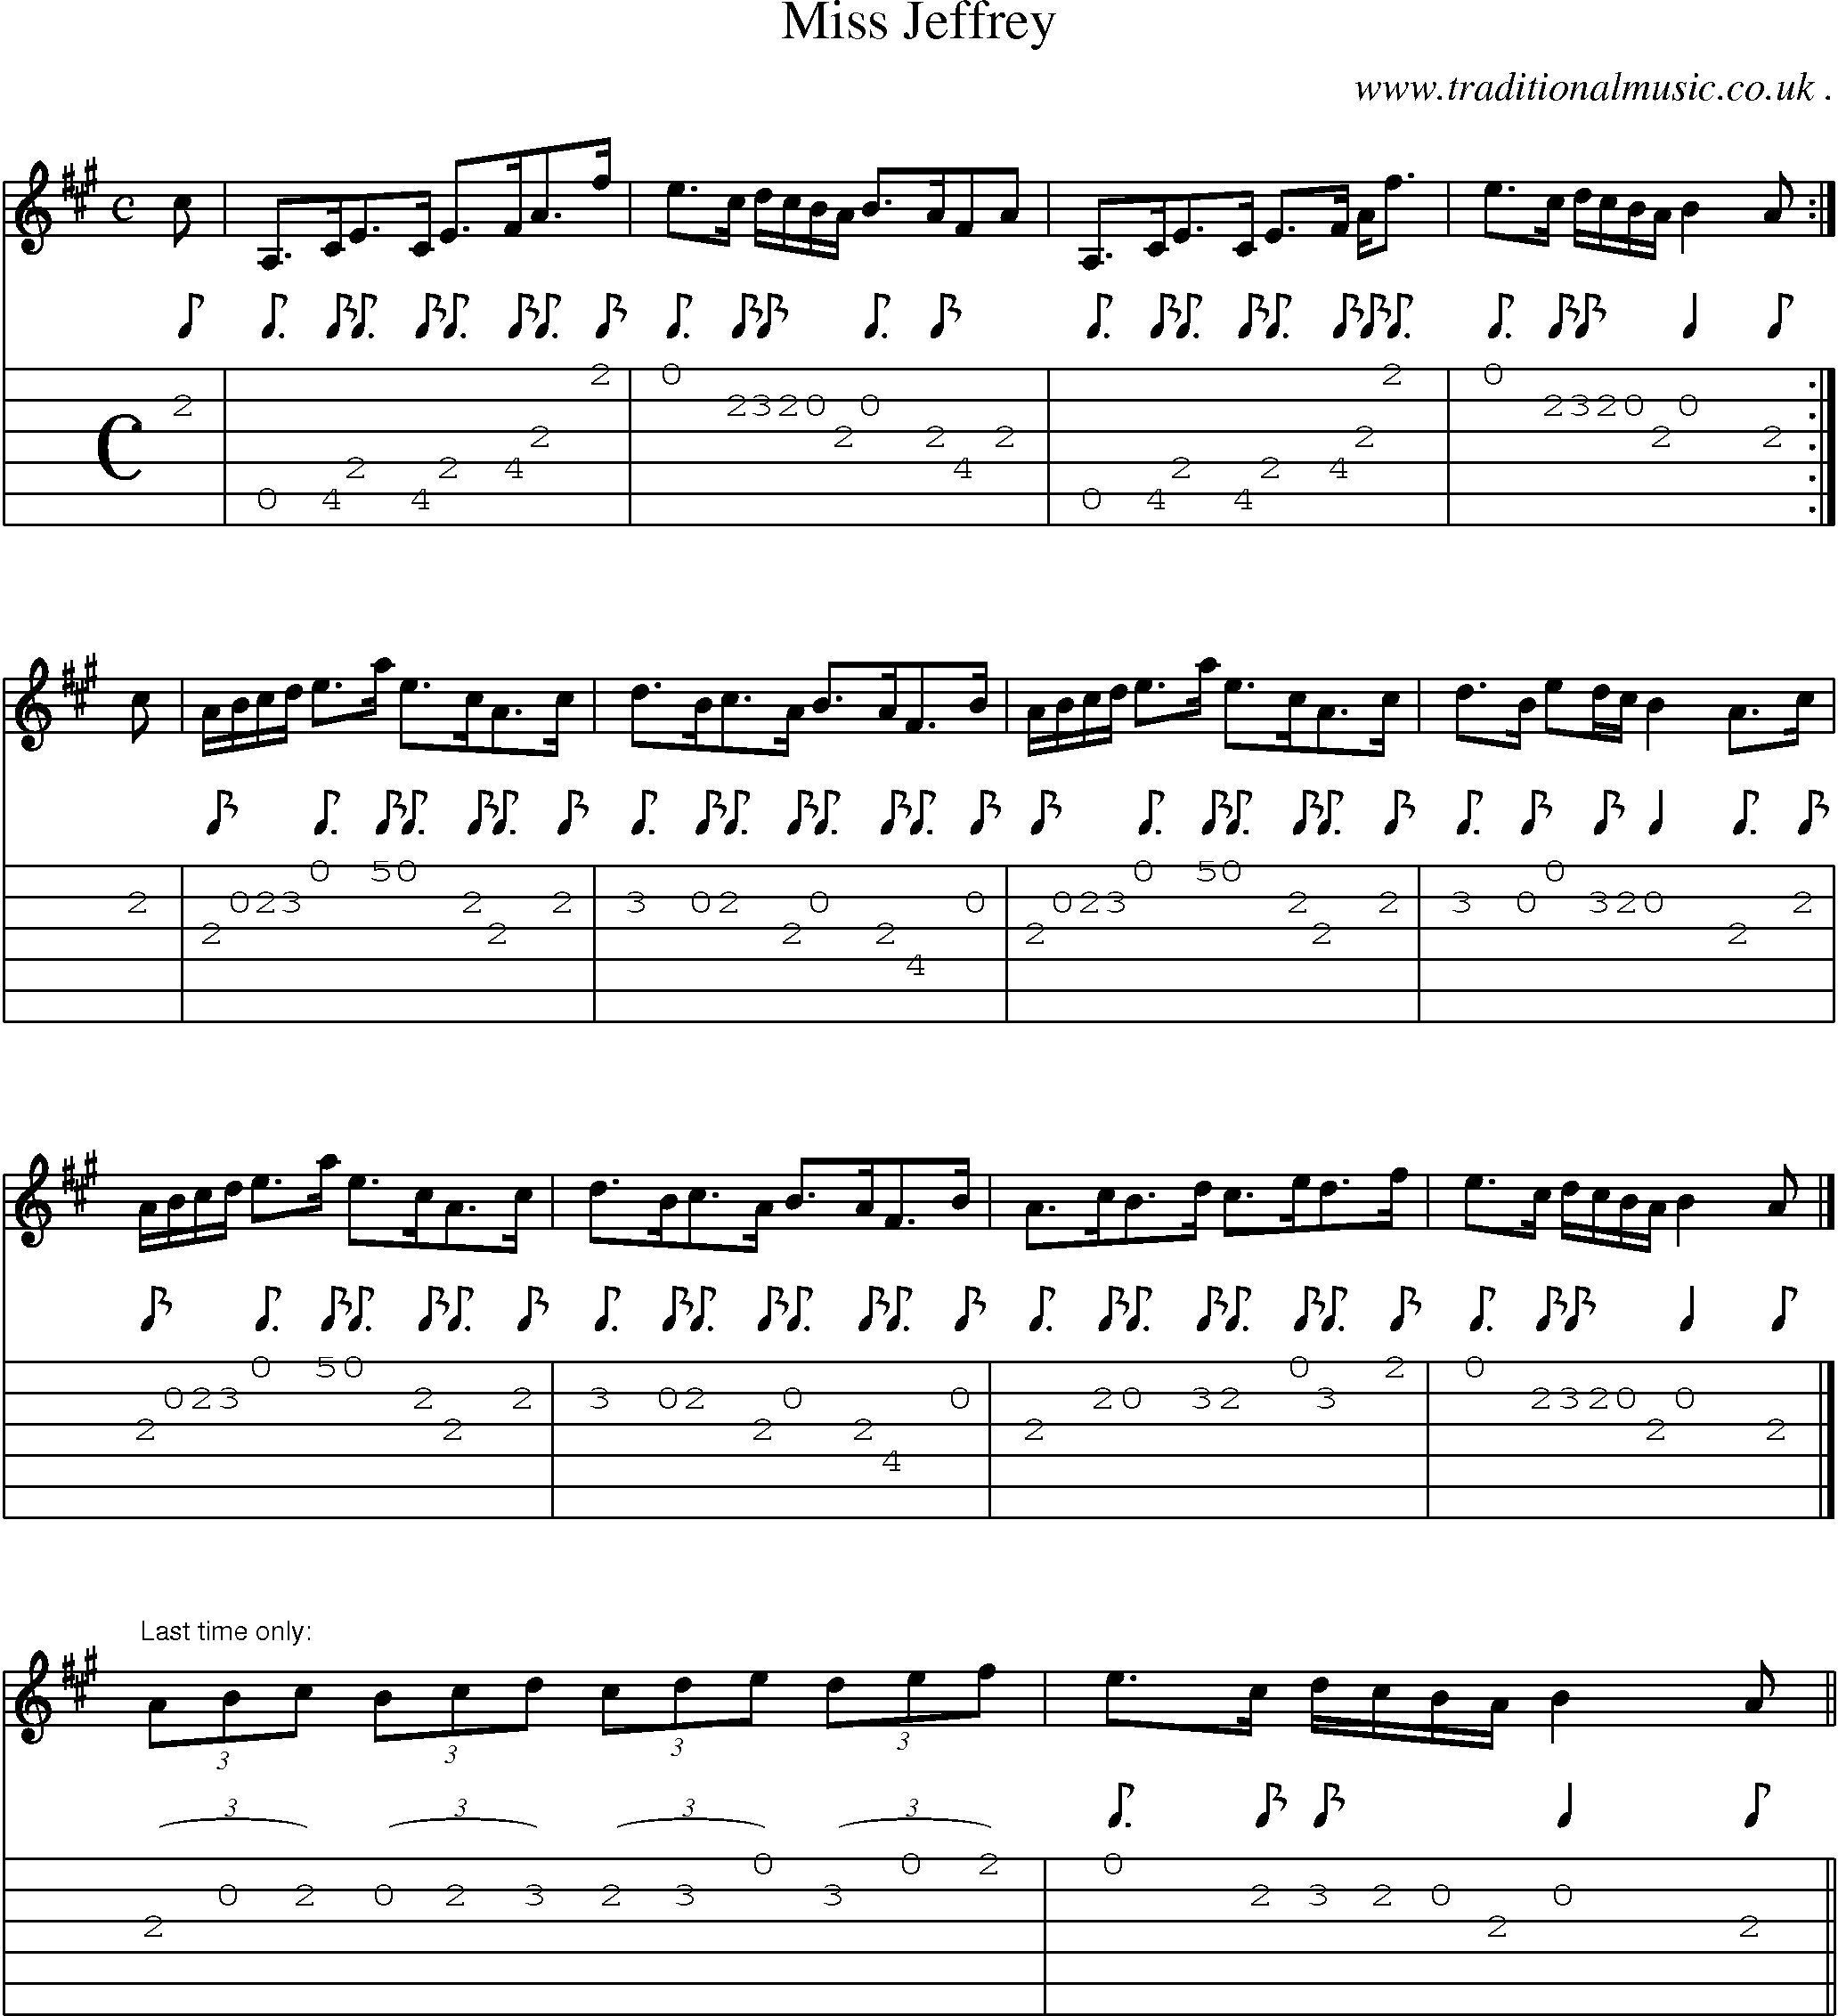 Sheet-music  score, Chords and Guitar Tabs for Miss Jeffrey